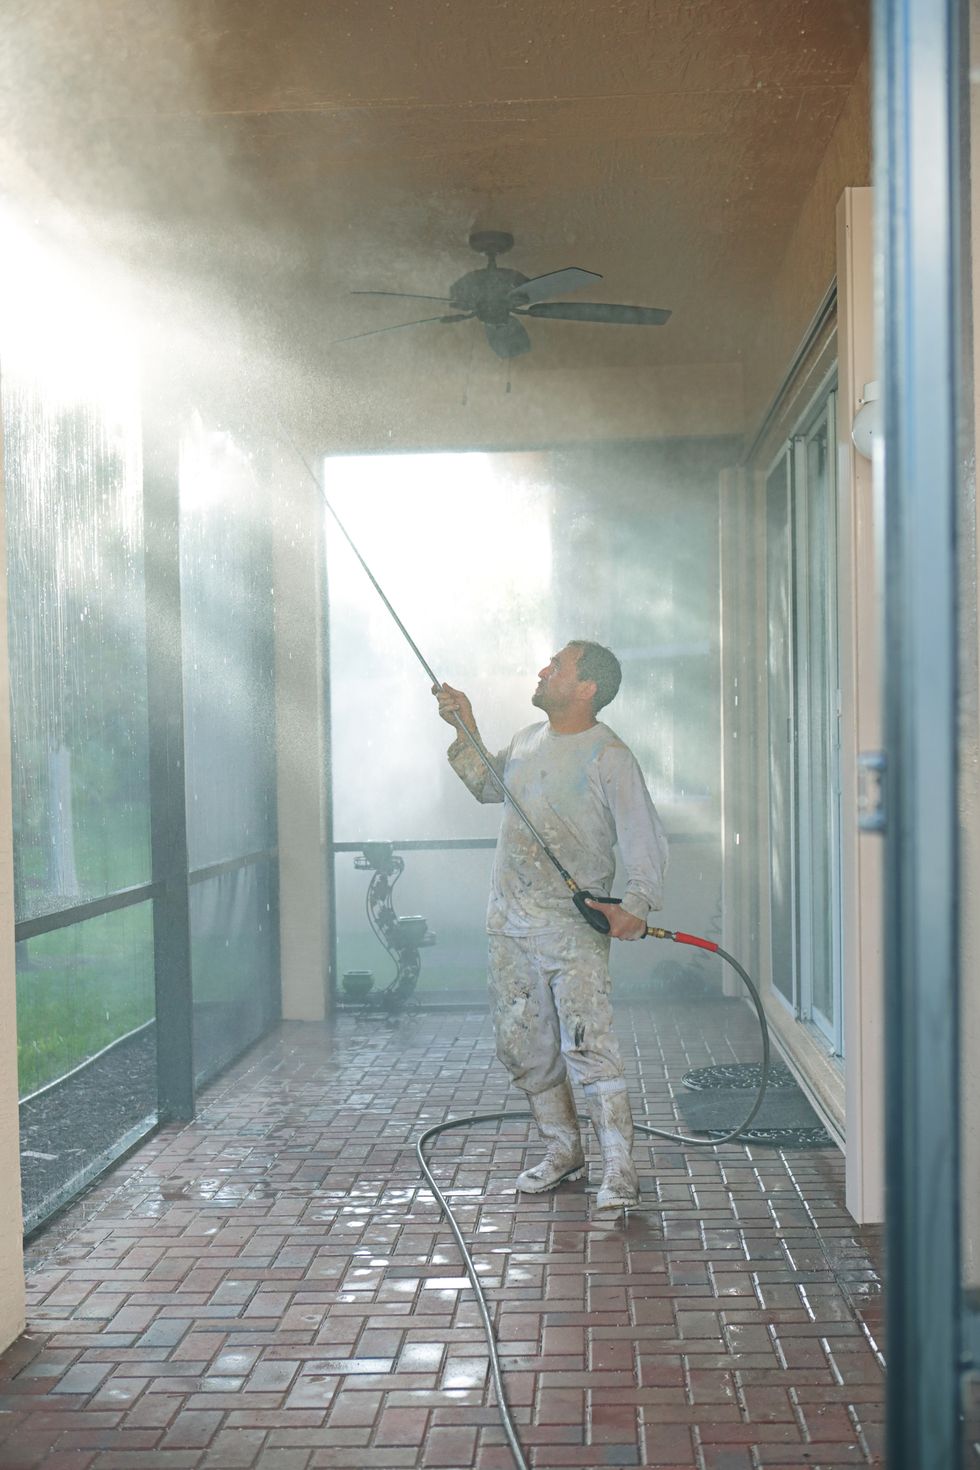 Homemade Window Cleaners for Power Washers